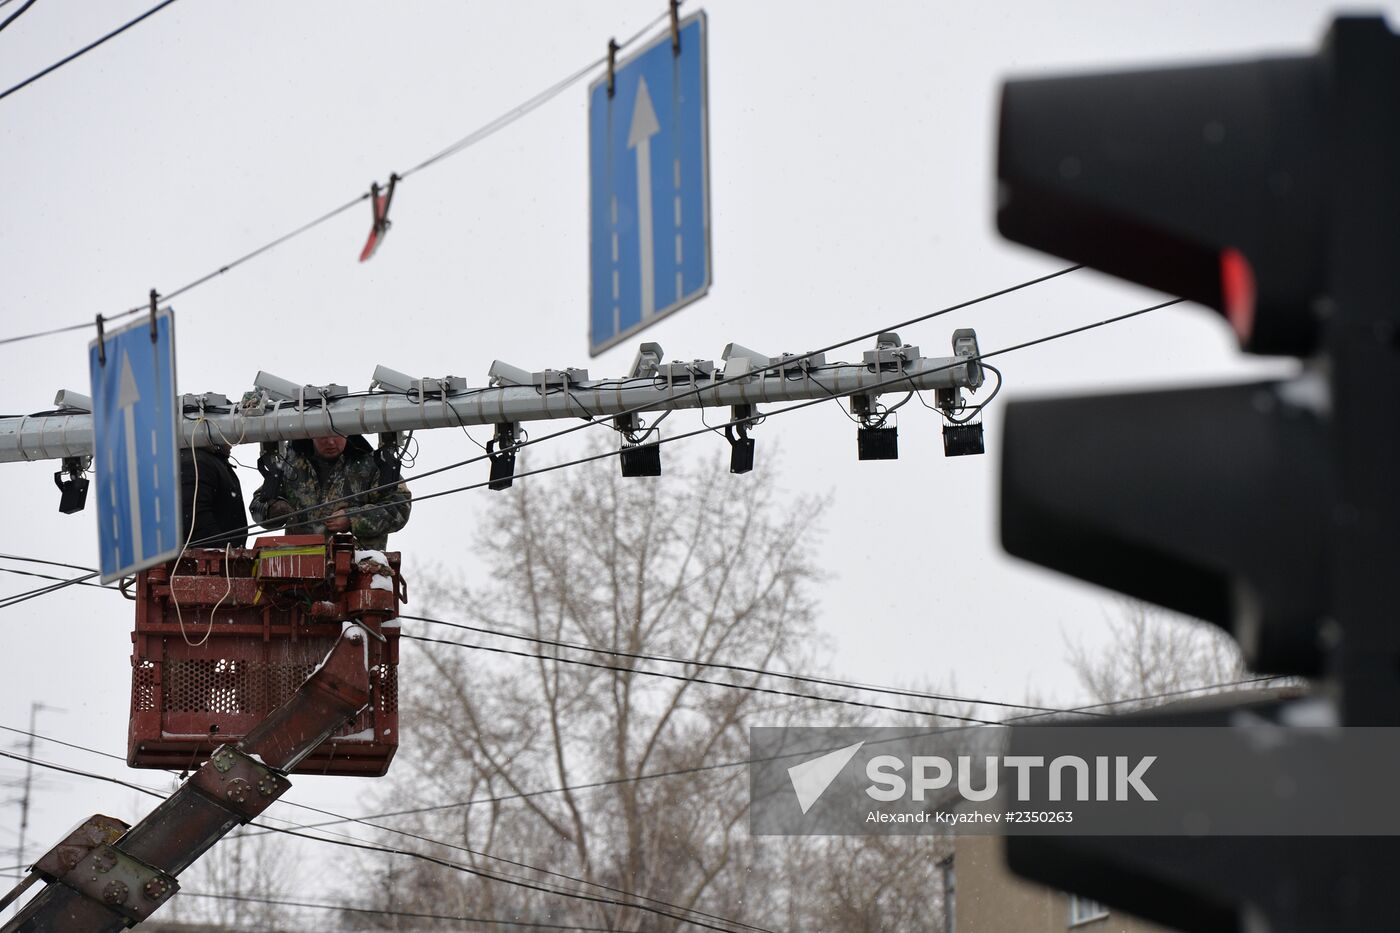 Automated traffic enforcement devices in Novosibirsk